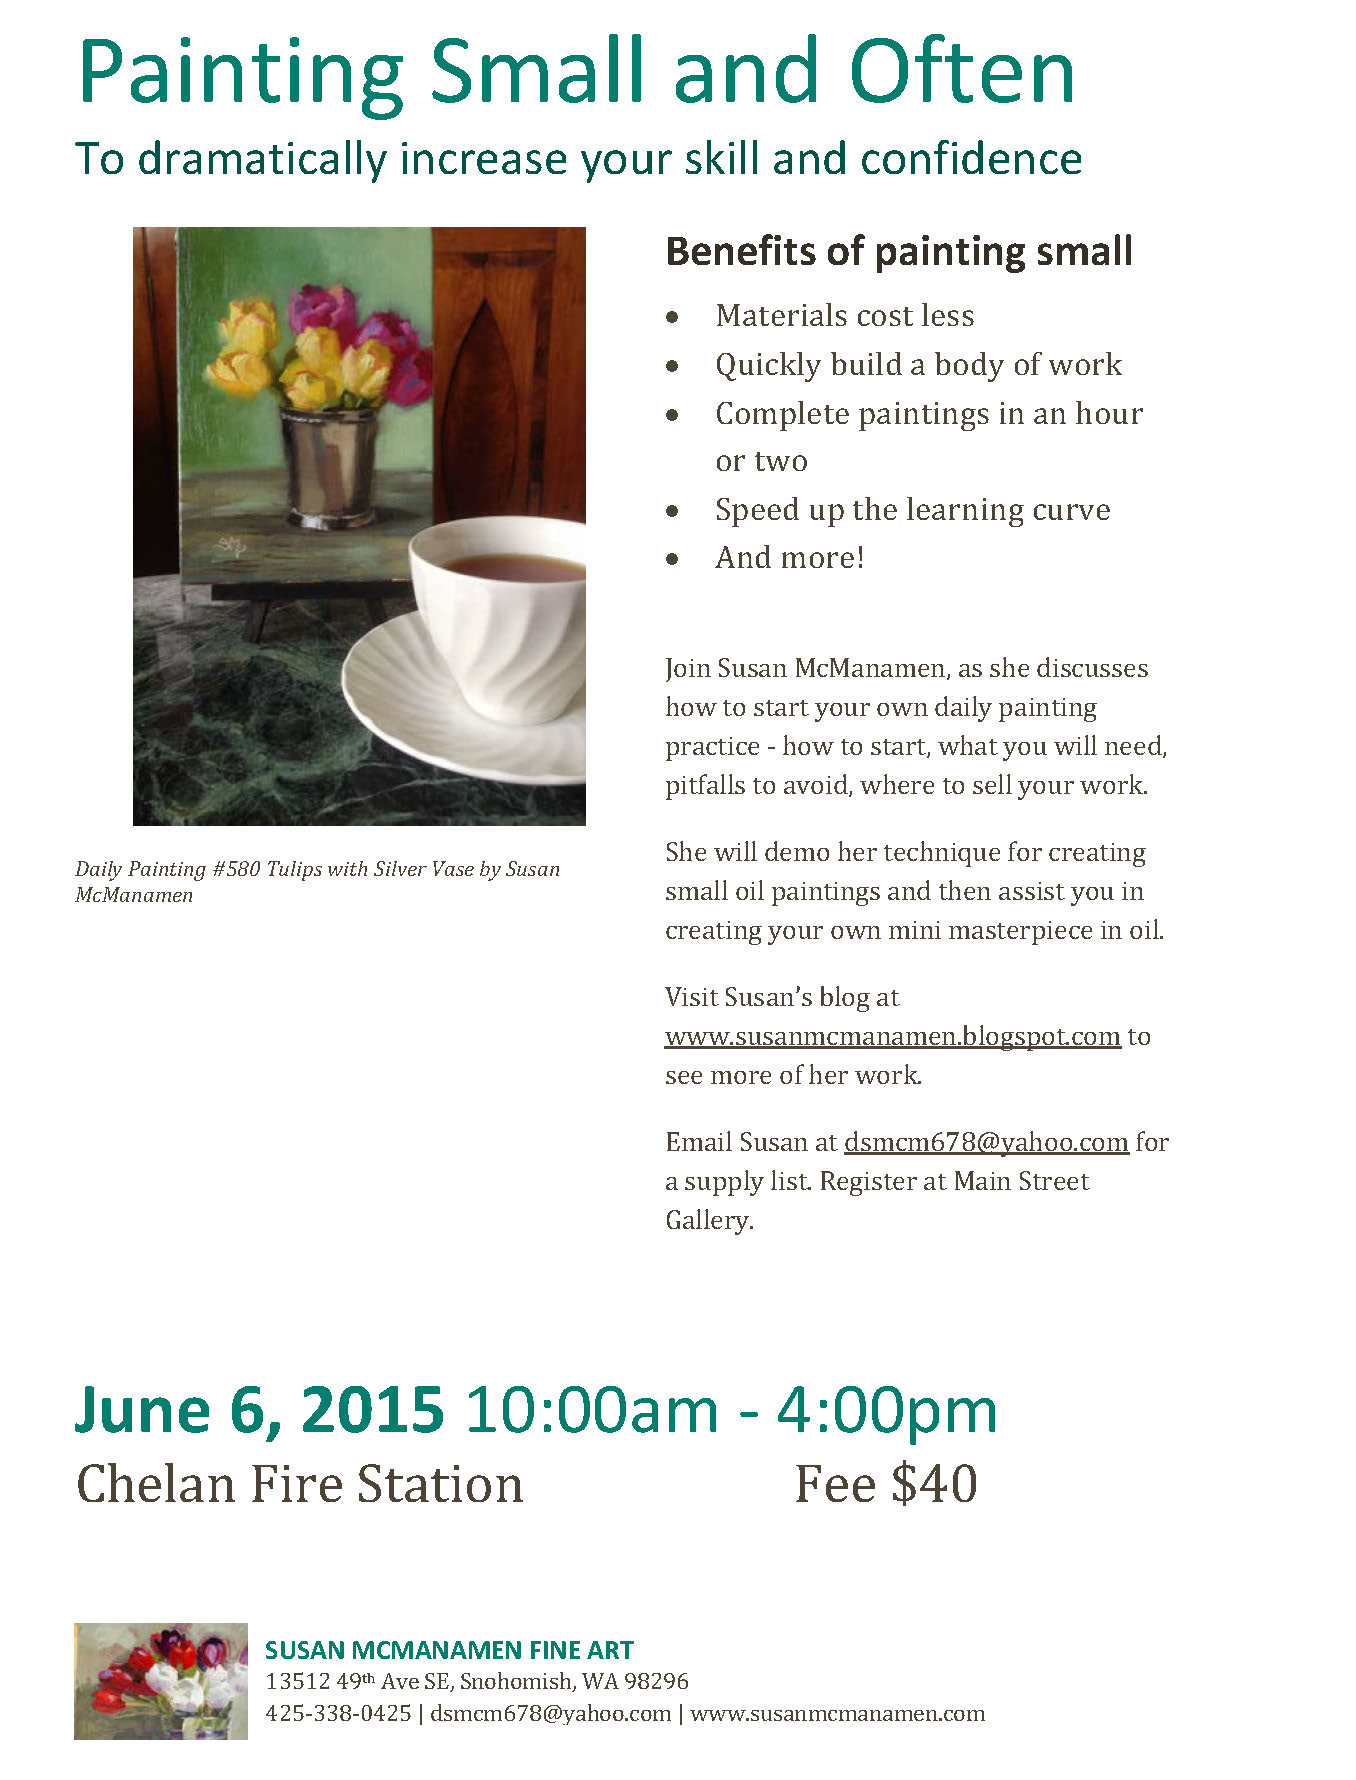 Painting Small and Often  - Painting Class by Susan McManamen